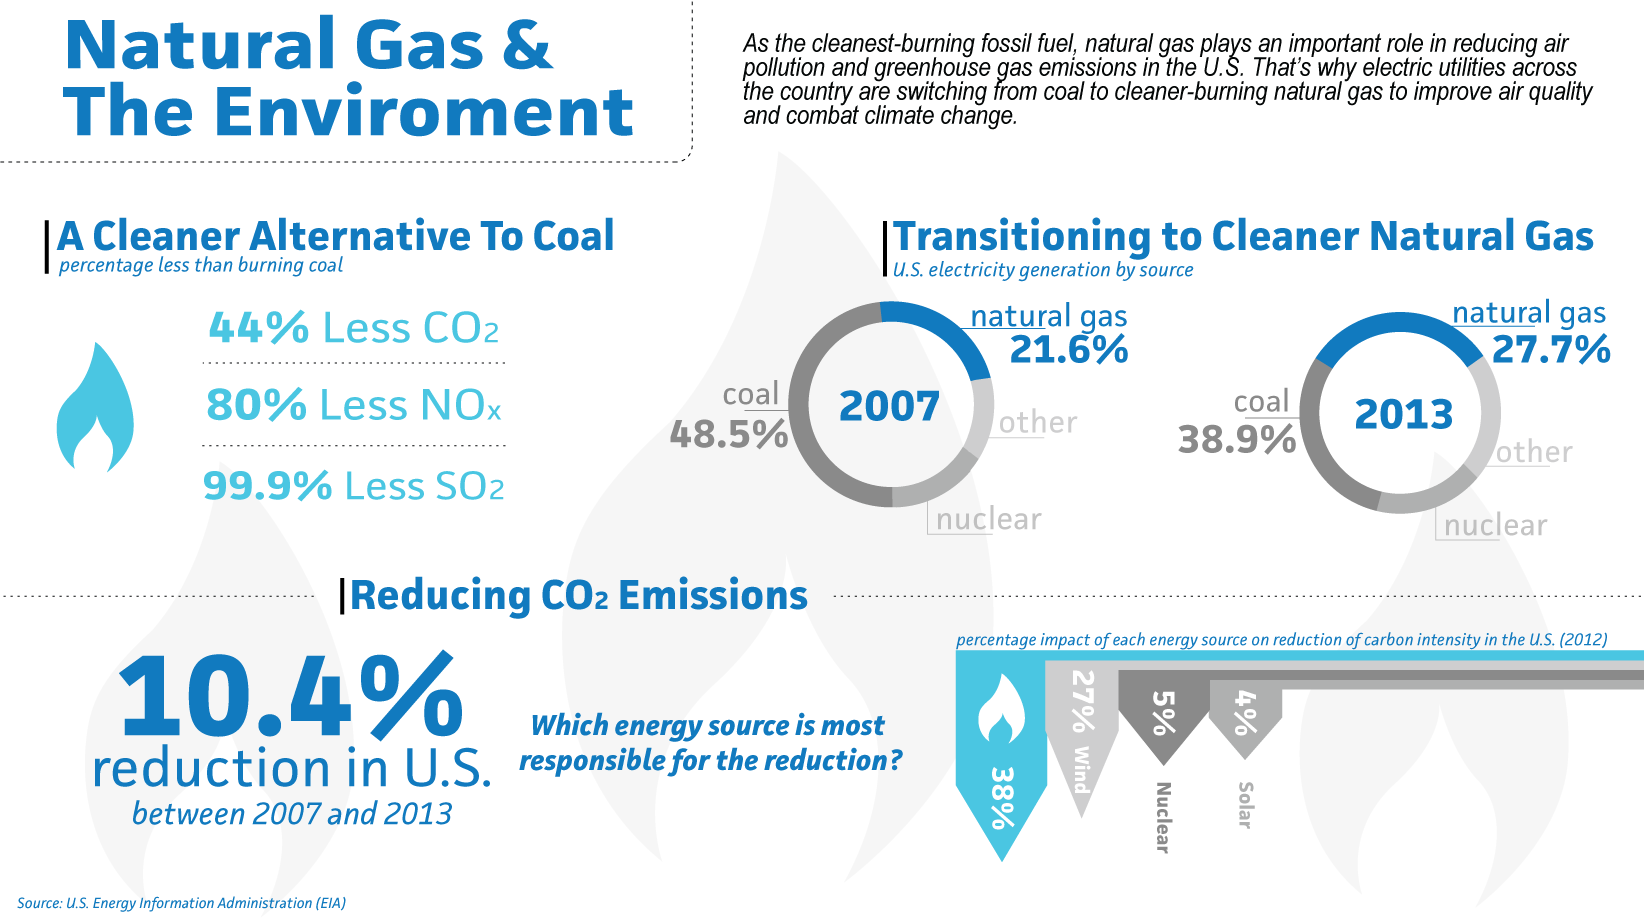 Natural Gas & The Environment infographic